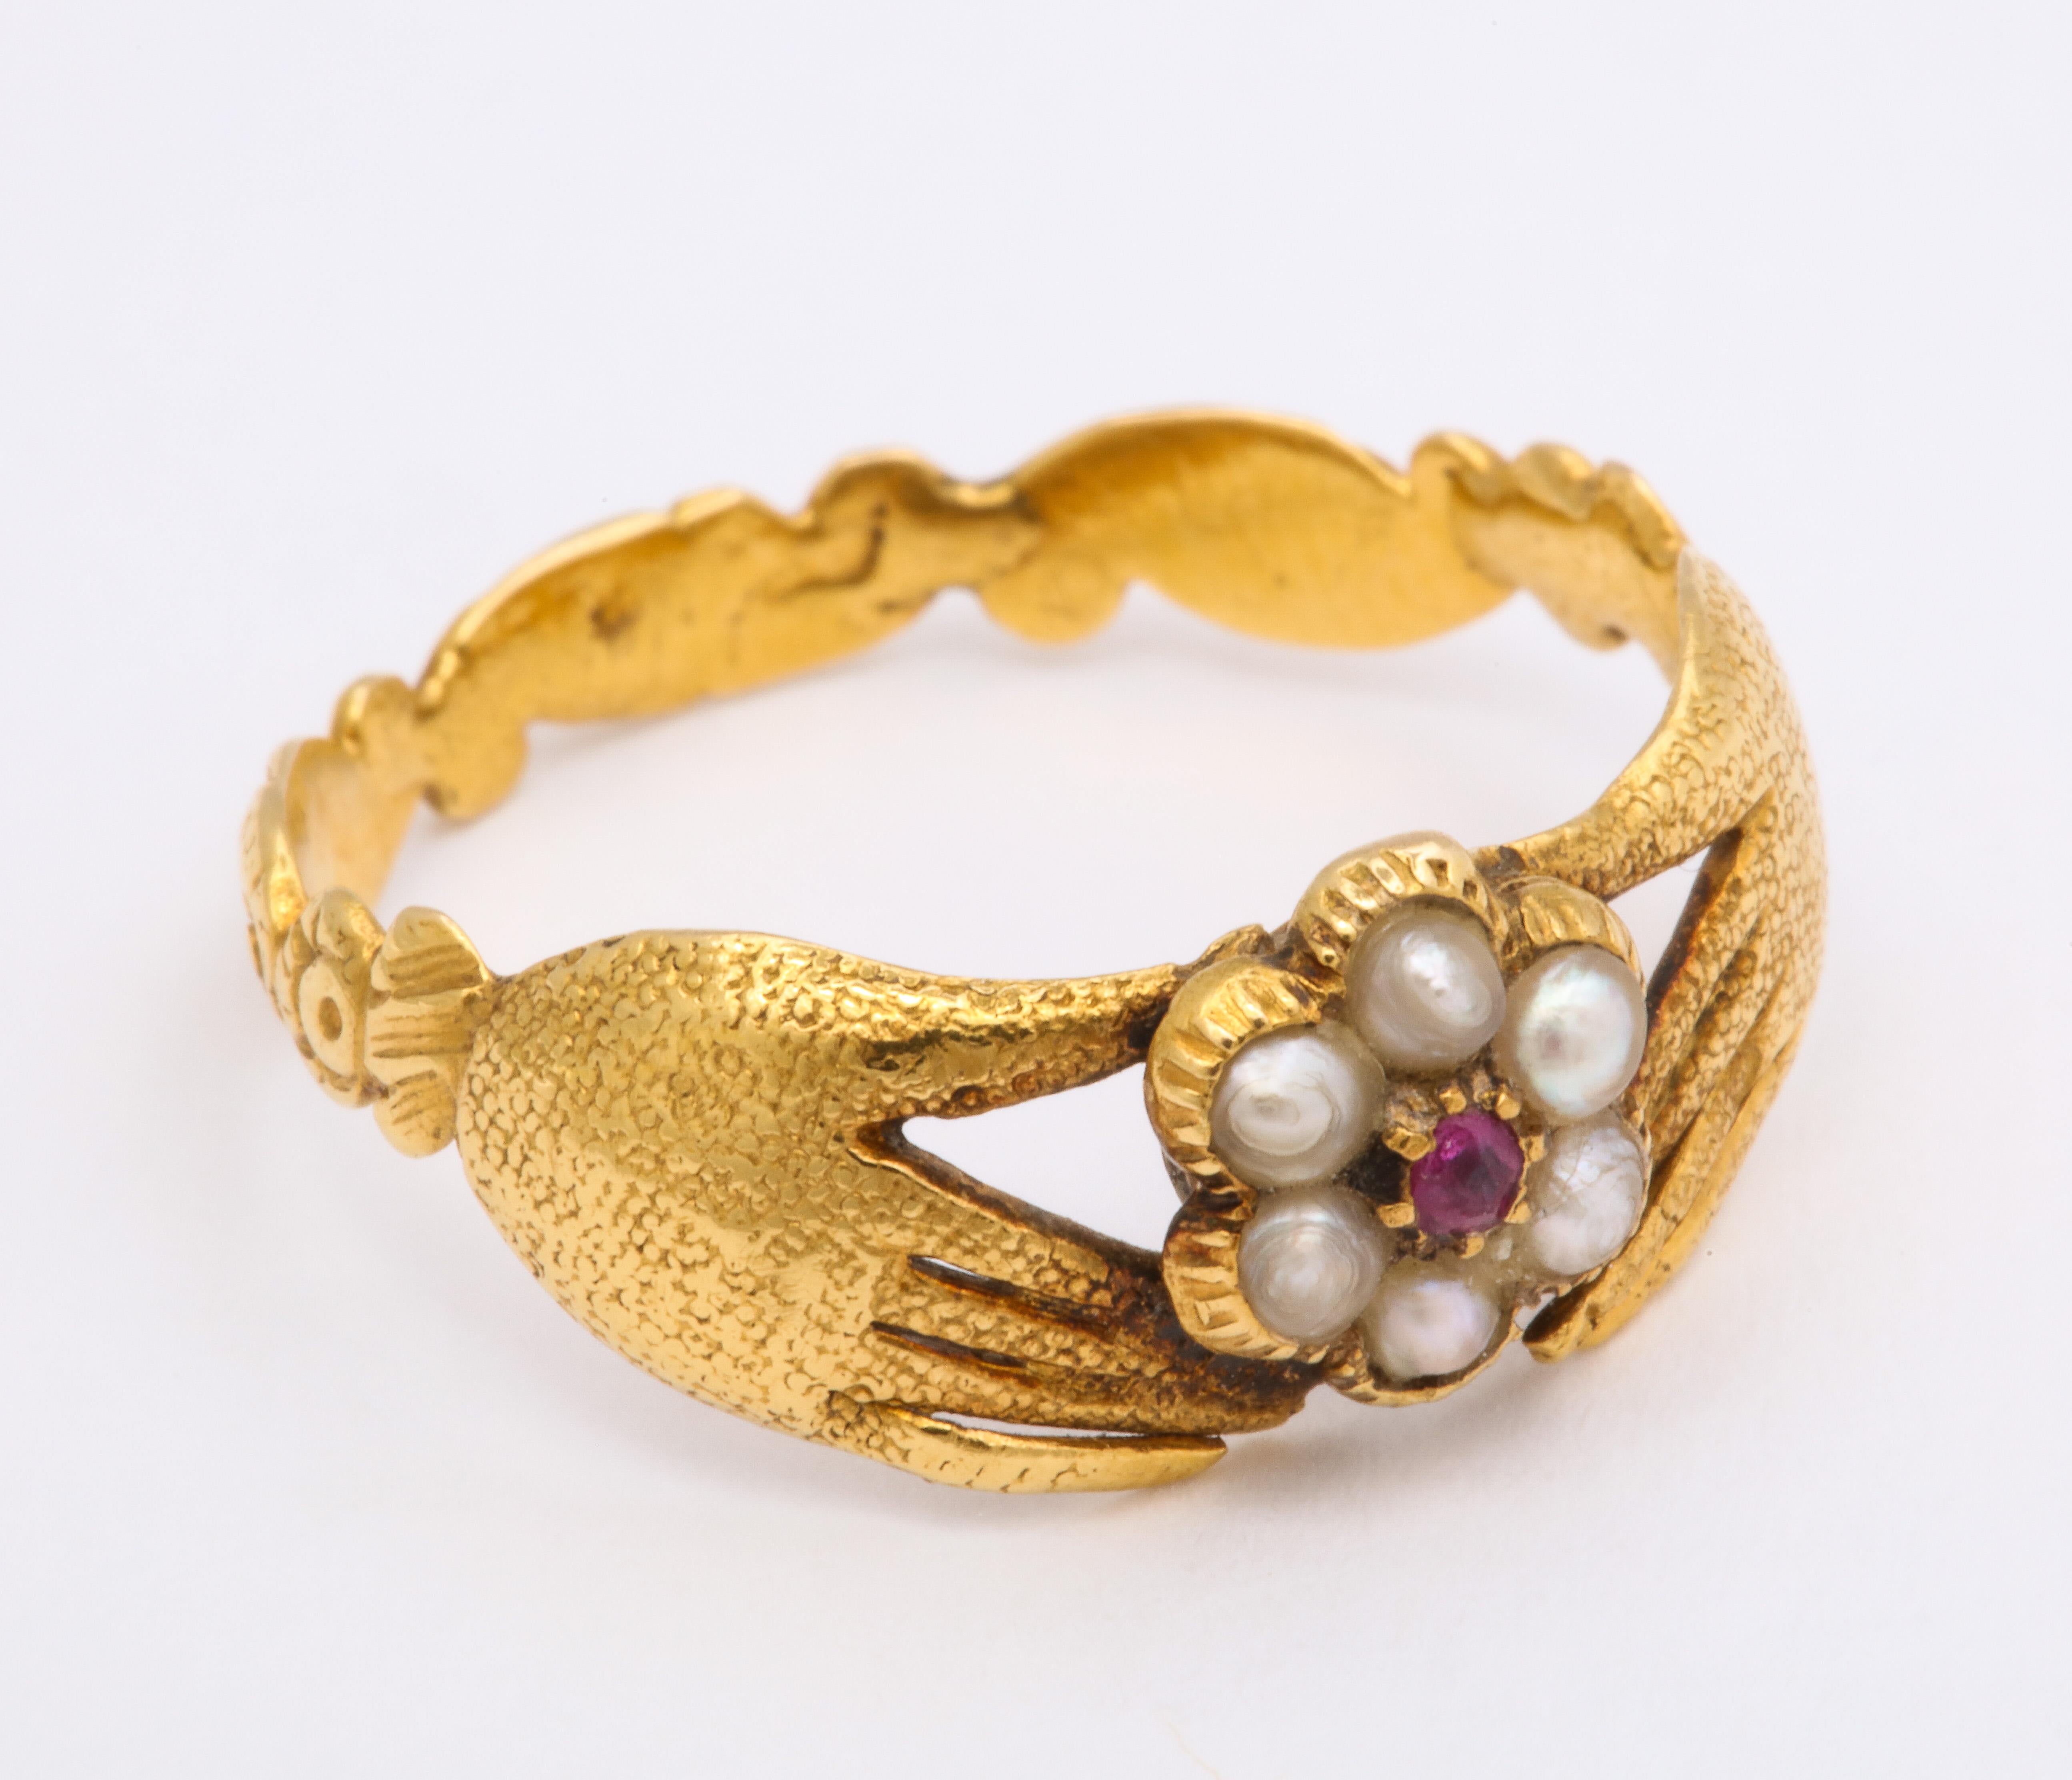 This English ring, made in 18K is a fede-like design. The hands themselves are not clasped but they clasp a central flower. The flower is made of a cluster of six pearls around a central ruby and has a locket back. Pretty engraved scroll shank.